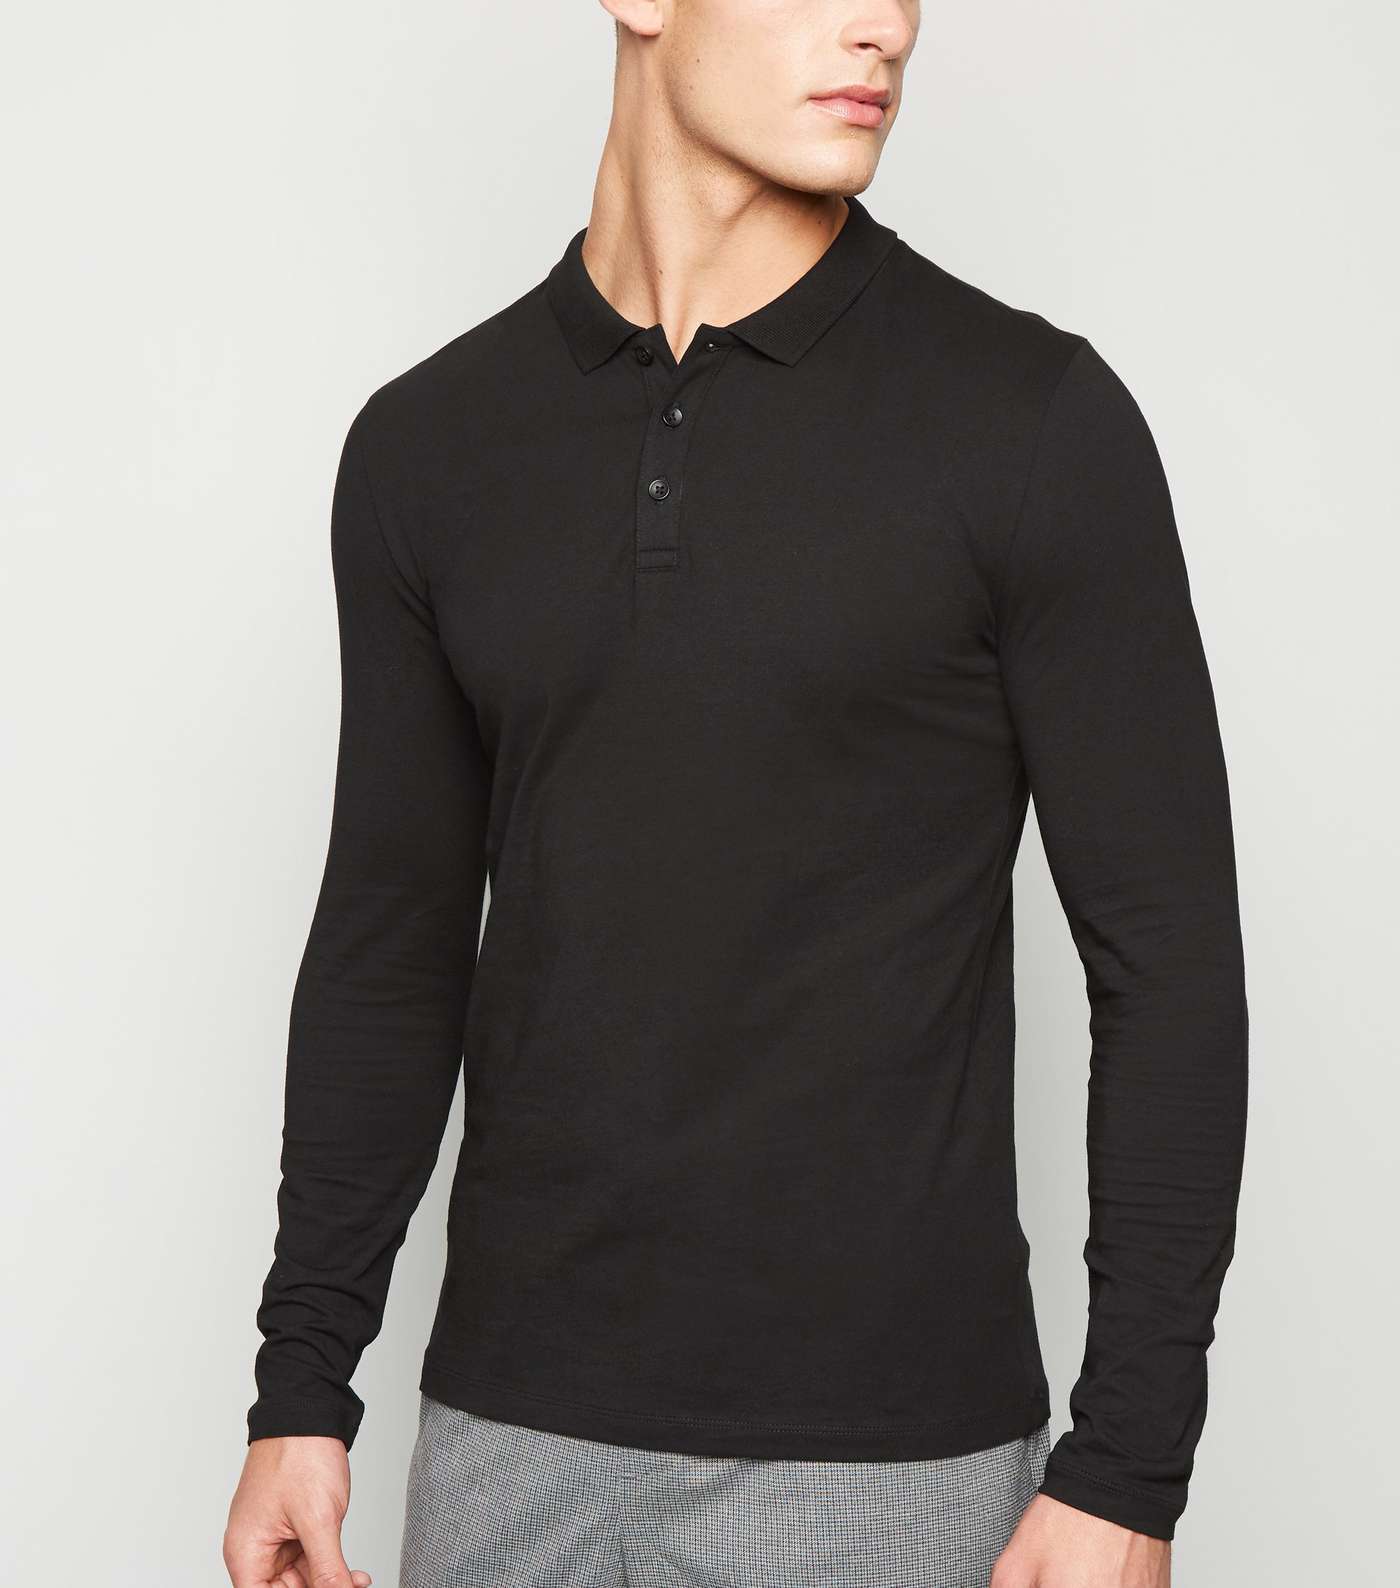 Black Long Sleeve Muscle Fit Polo Shirt